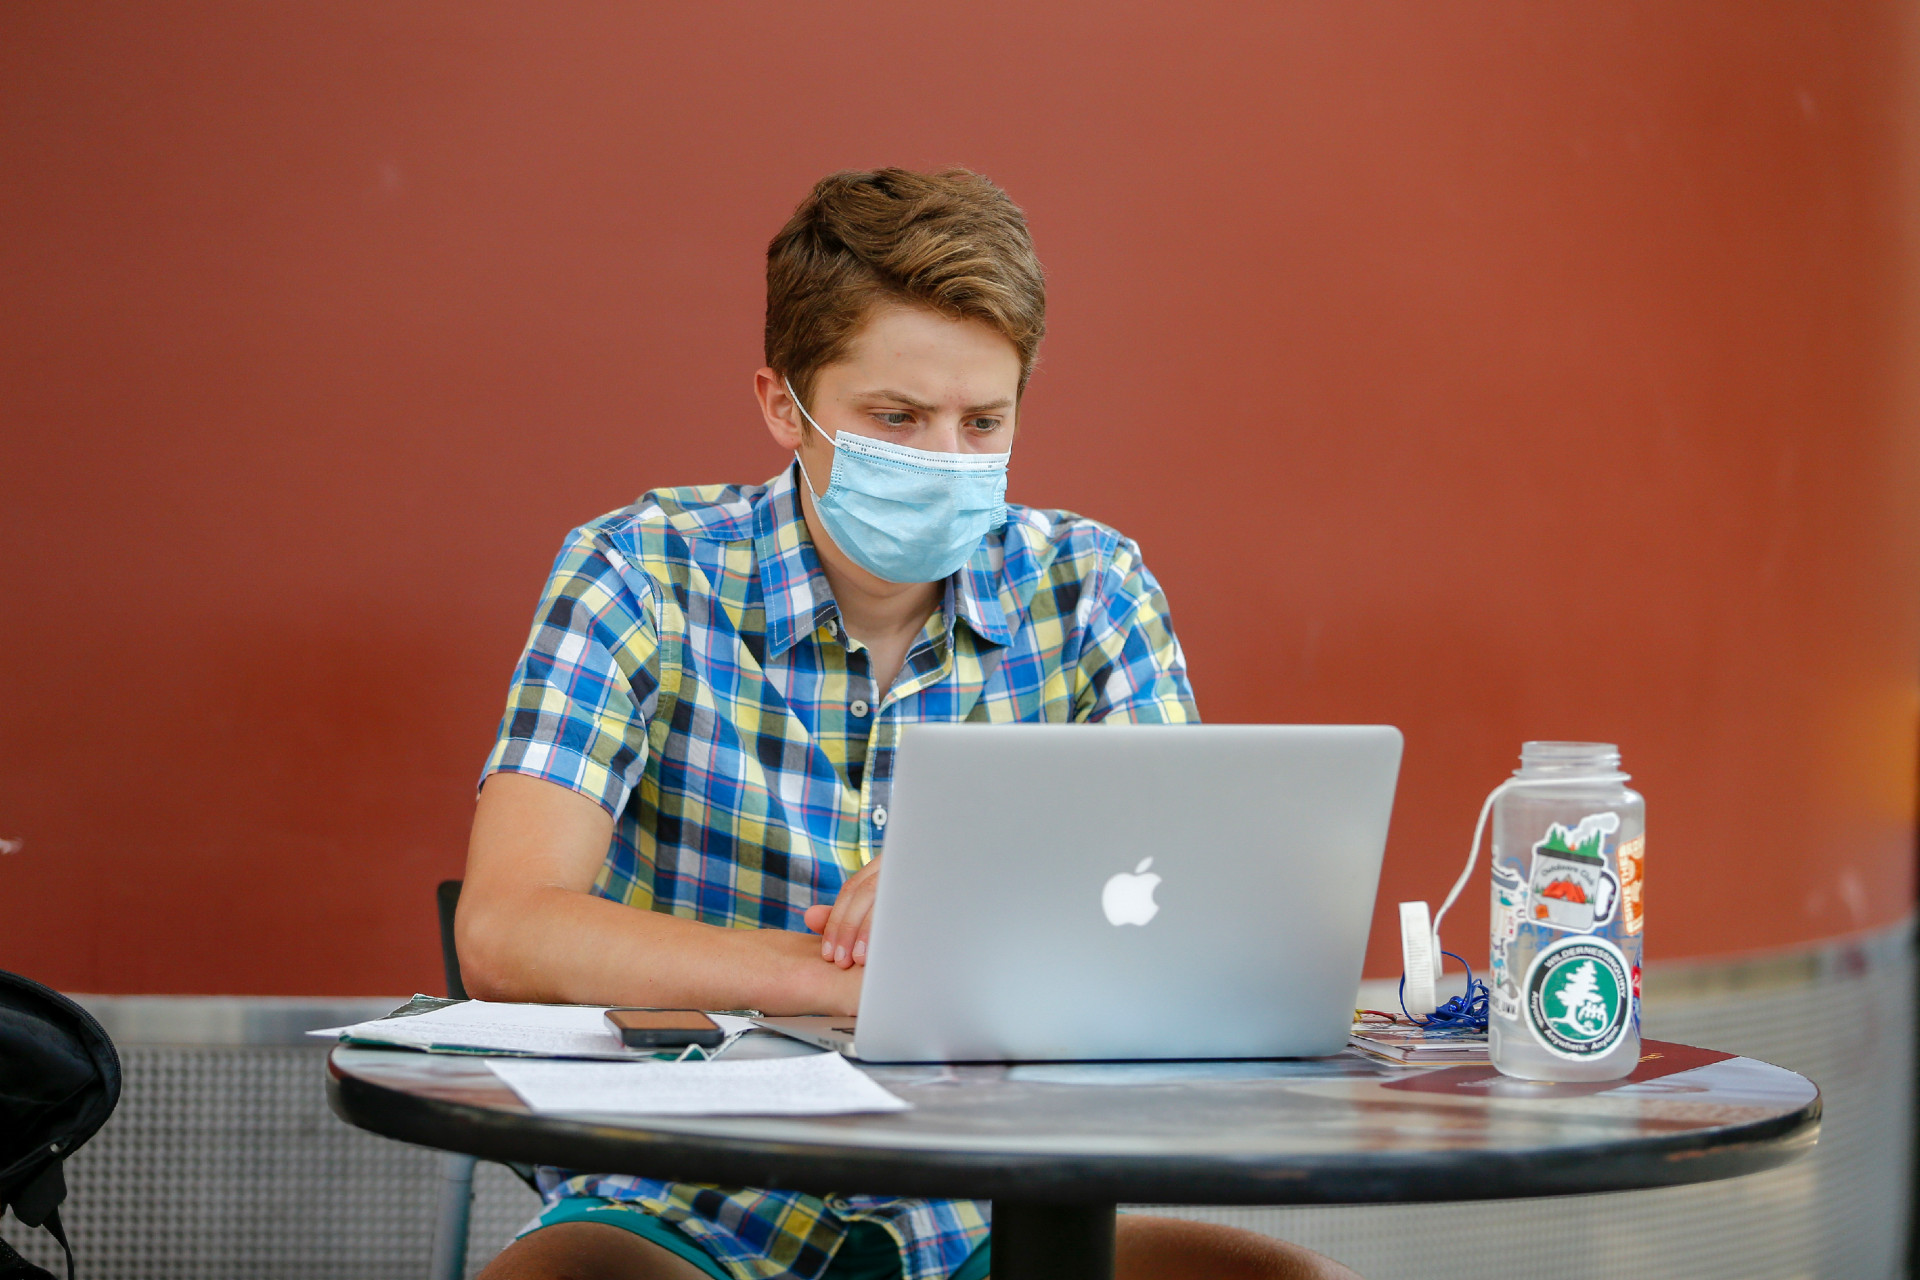 A student works on his computer while wearing a mask